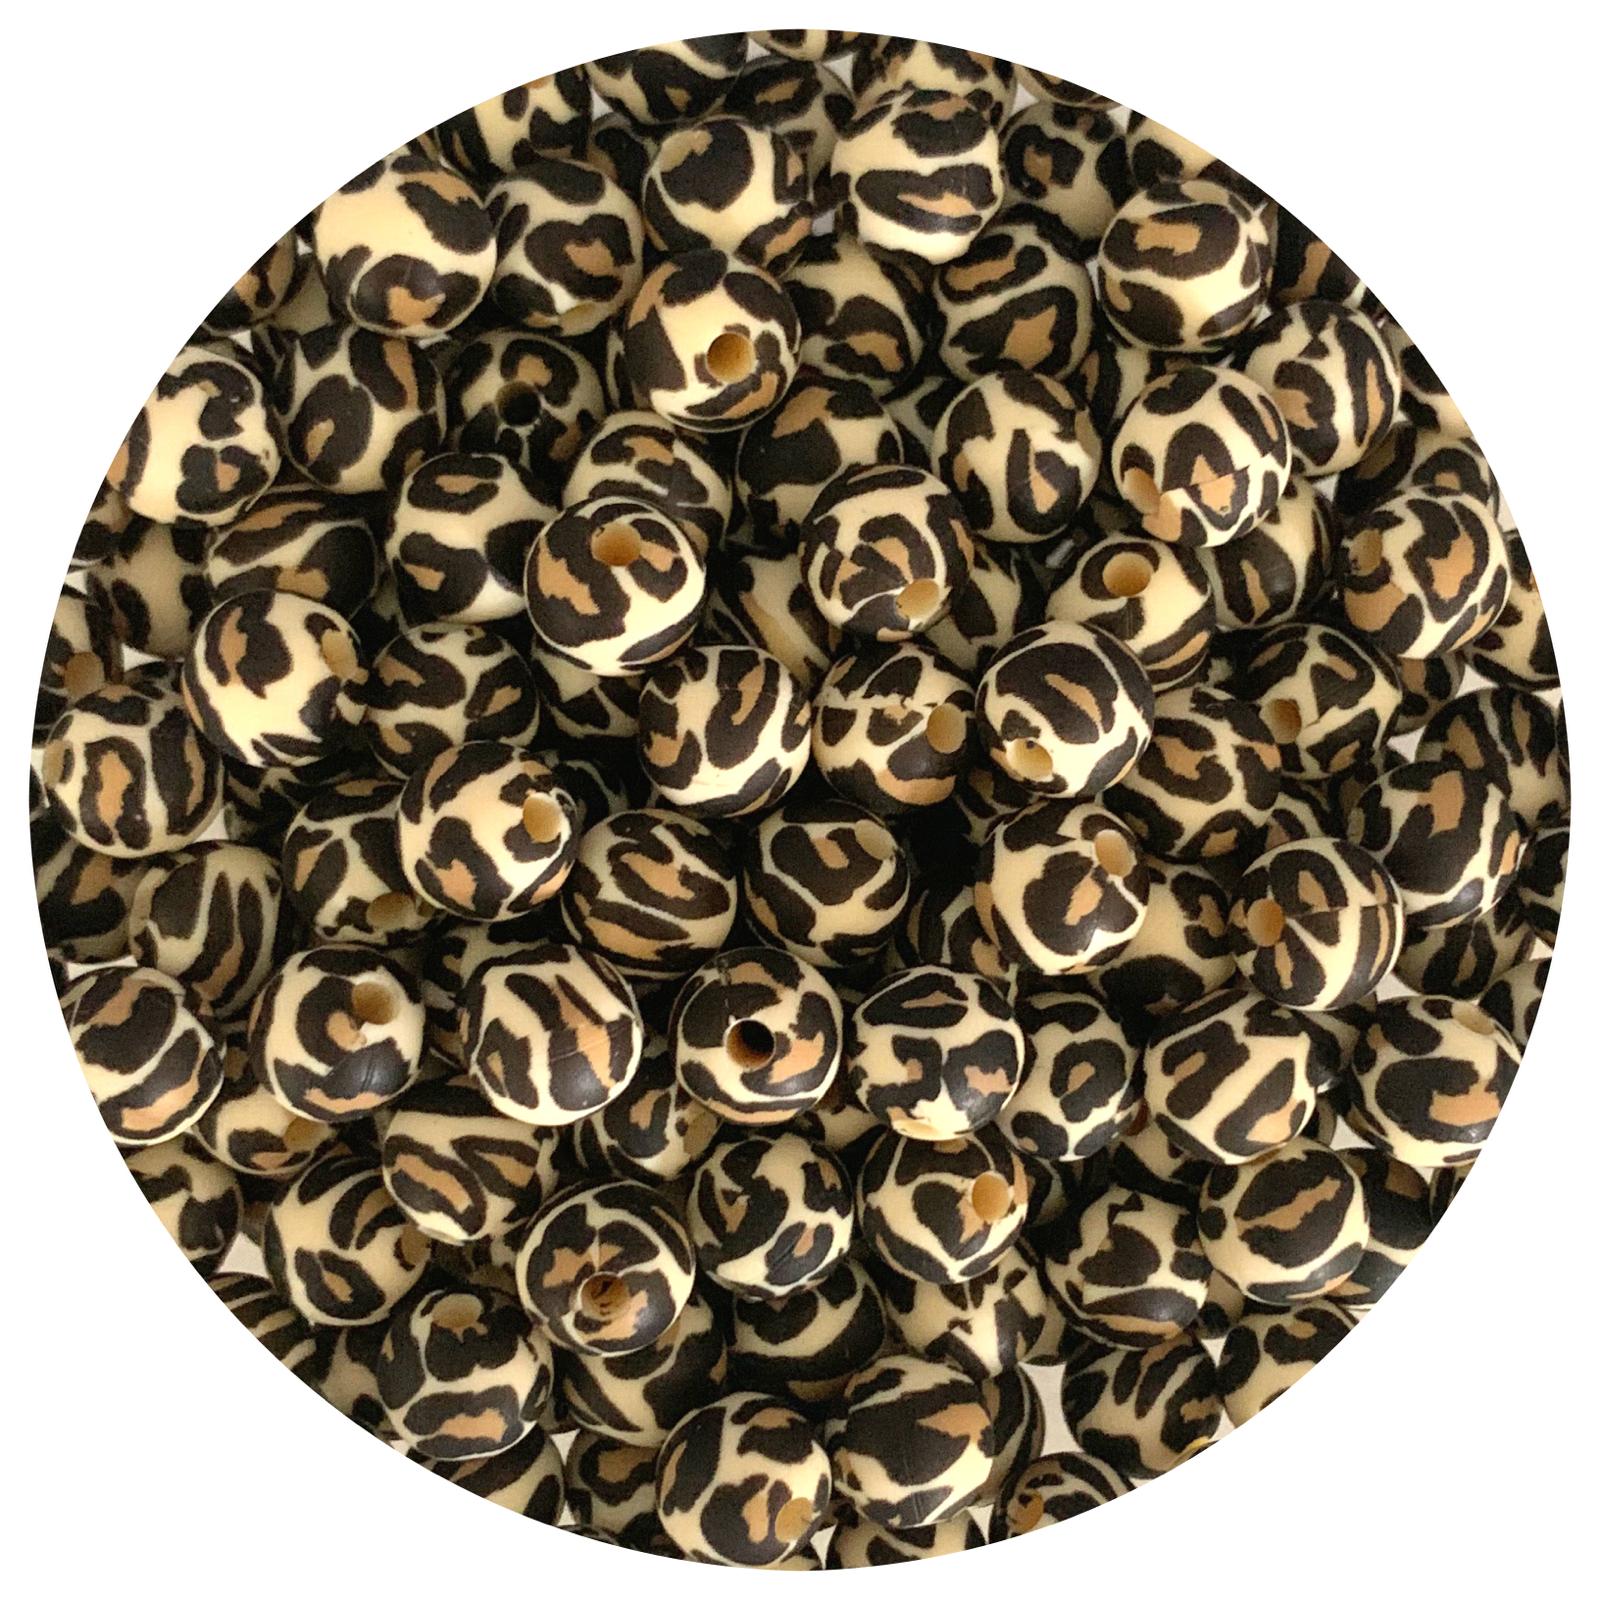 Leopard - 9mm Round Silicone Beads - 5 Beads